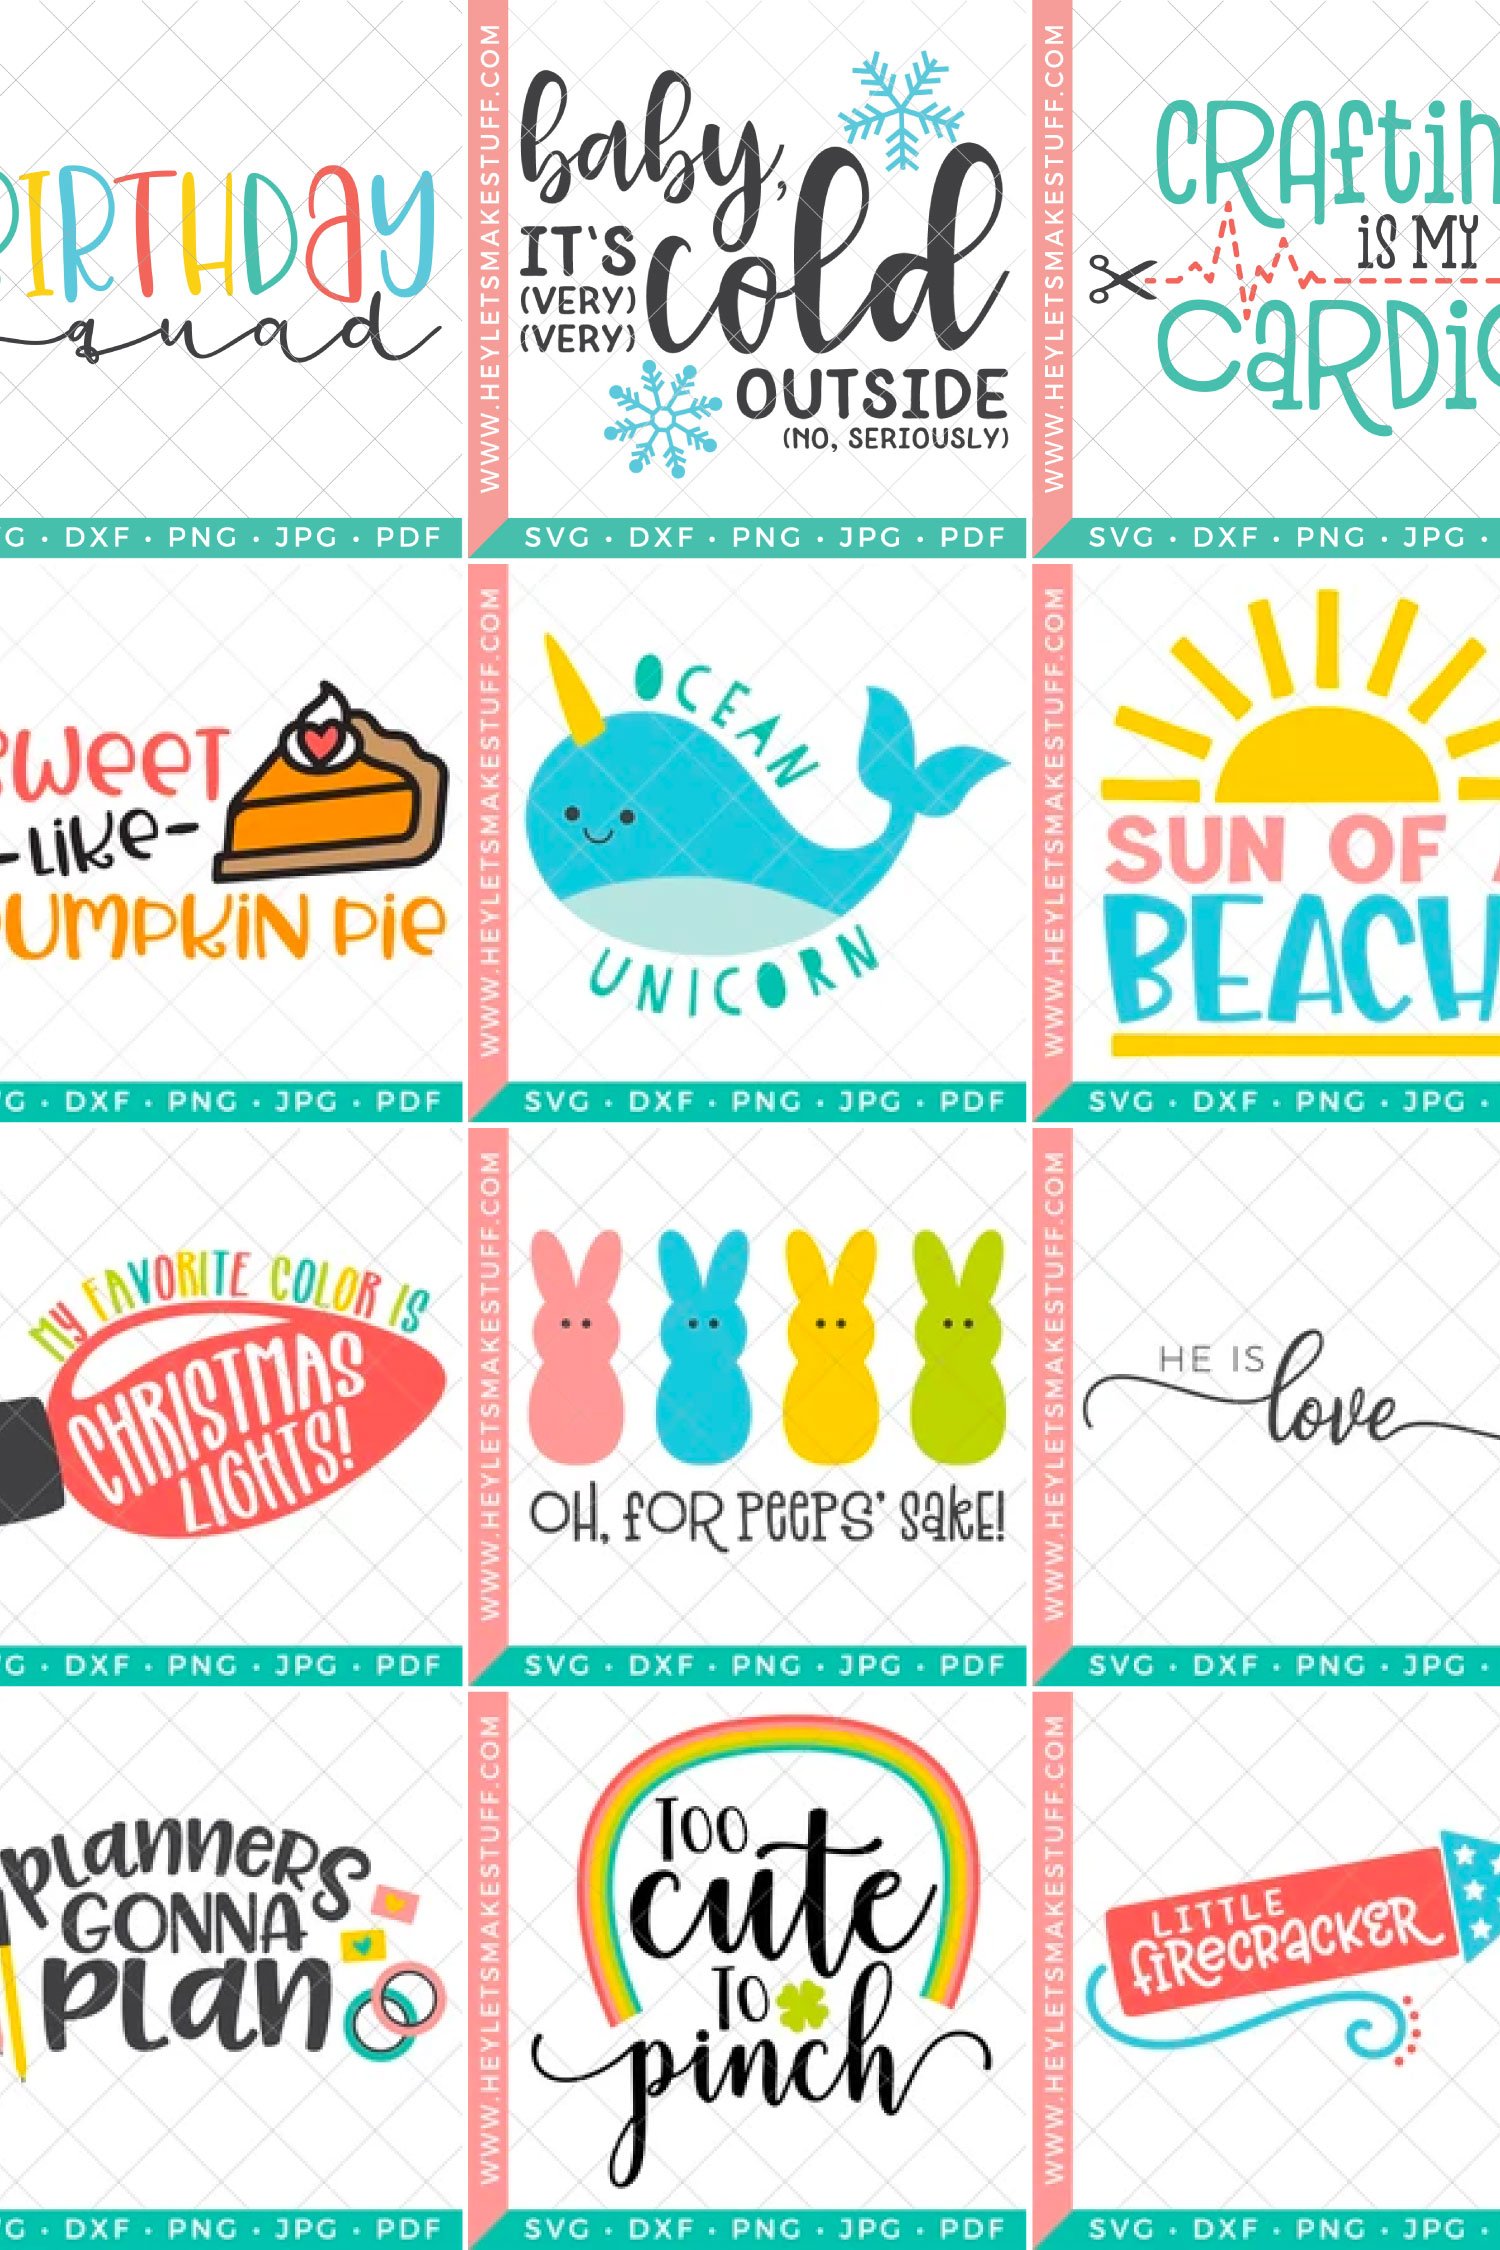 Download Free Where To Find Cheap And Free Svg Files For Cricut Silhouette PSD Mockup Template